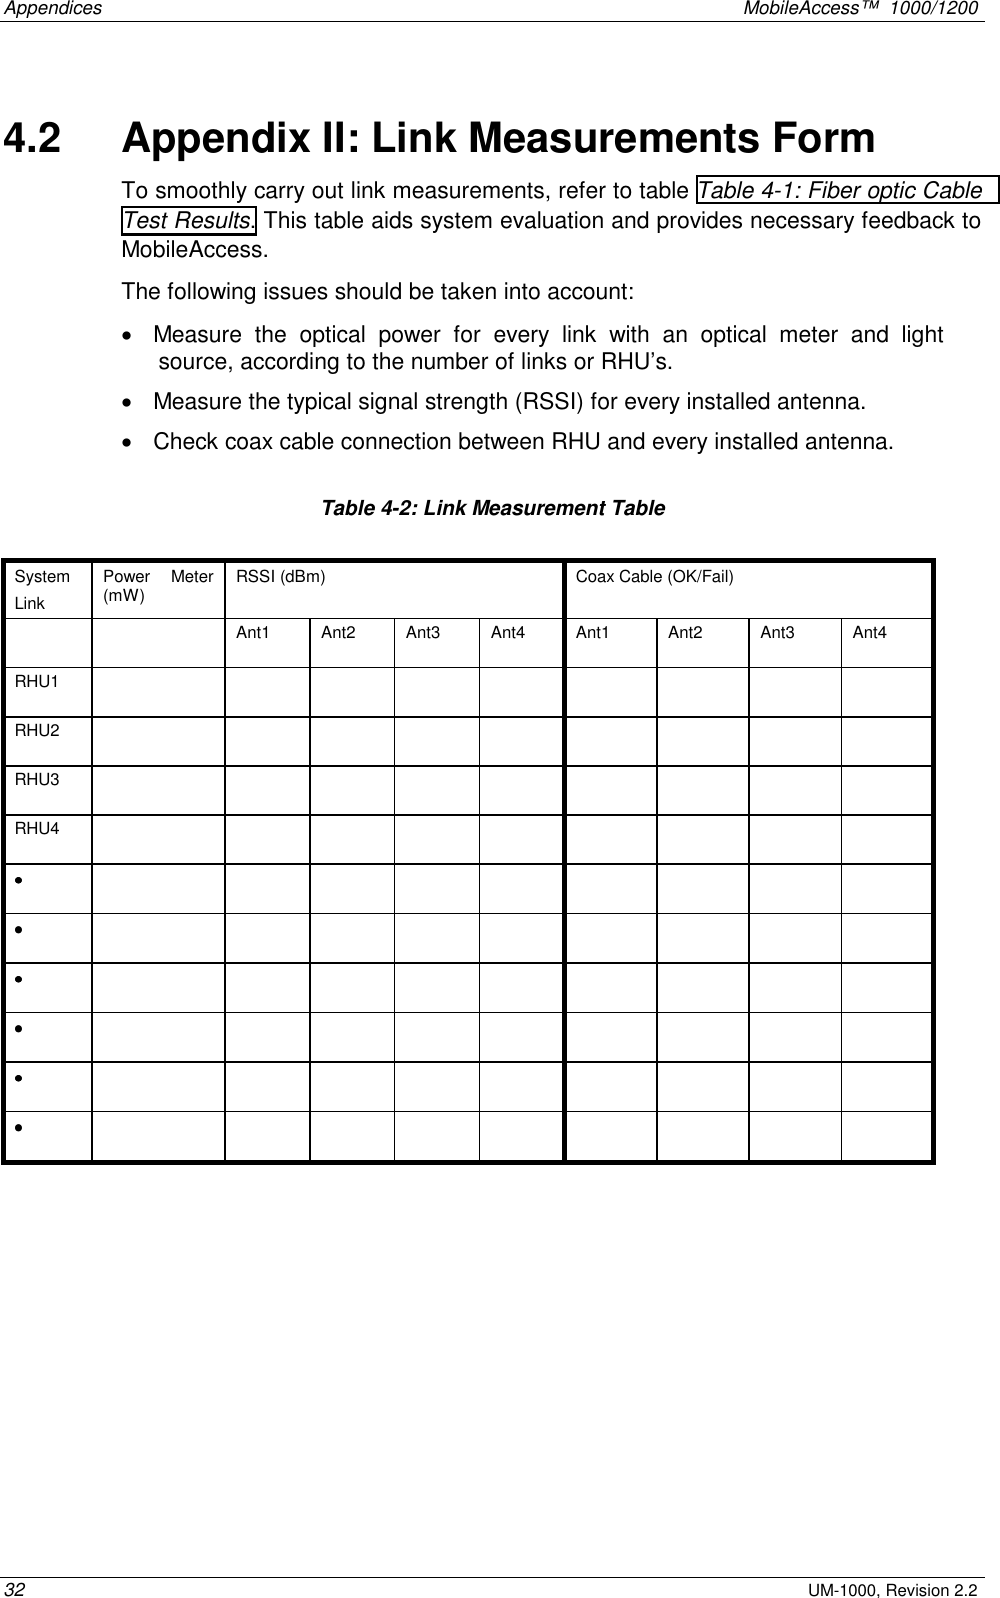 Appendices    MobileAccess™  1000/1200 32 UM-1000, Revision 2.2 4.2   Appendix II: Link Measurements Form To smoothly carry out link measurements, refer to table Table  4-1: Fiber optic Cable Test Results. This table aids system evaluation and provides necessary feedback to MobileAccess.   The following issues should be taken into account: •  Measure the optical power for every link with an optical meter and light source, according to the number of links or RHU’s. •  Measure the typical signal strength (RSSI) for every installed antenna. •  Check coax cable connection between RHU and every installed antenna.     Table  4-2: Link Measurement Table  System Link Power Meter (mW)  RSSI (dBm)  Coax Cable (OK/Fail)     Ant1 Ant2 Ant3 Ant4 Ant1  Ant2  Ant3  Ant4 RHU1              RHU2              RHU3              RHU4              ••••                  ••••                  ••••                  ••••                  ••••                  ••••                   